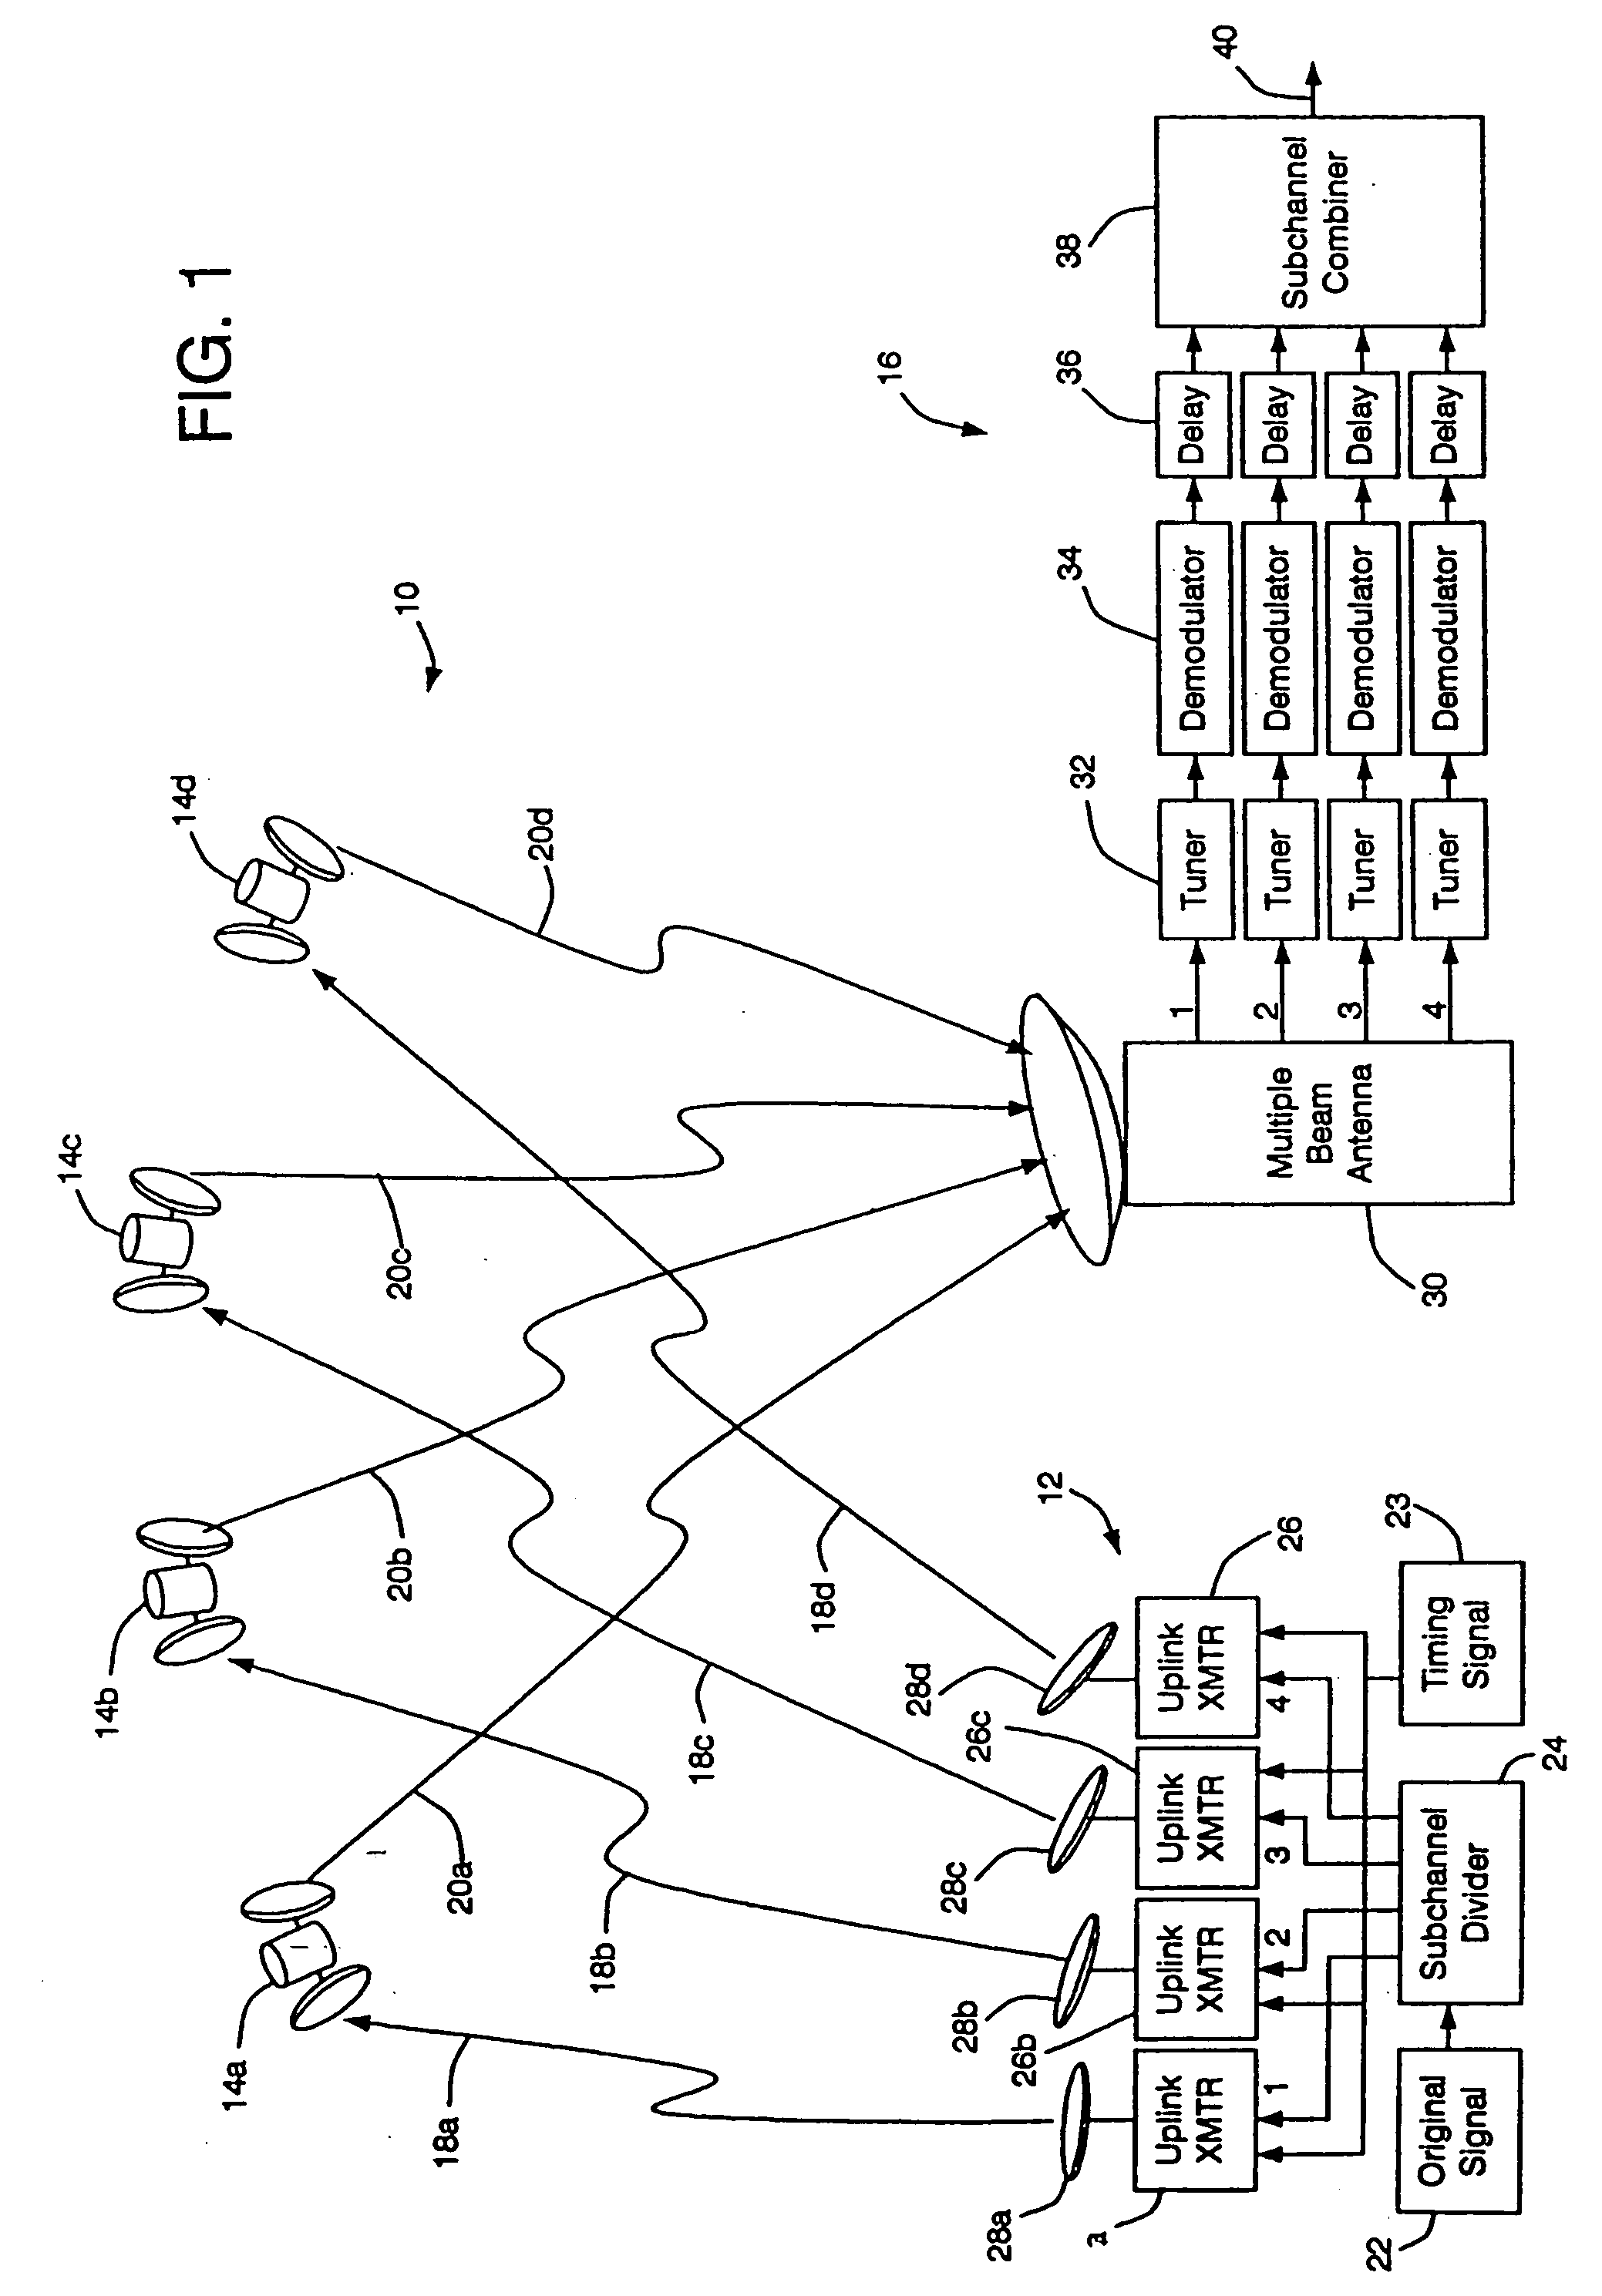 Method and apparatus for combining transponders on multiple satellites into virtual channels